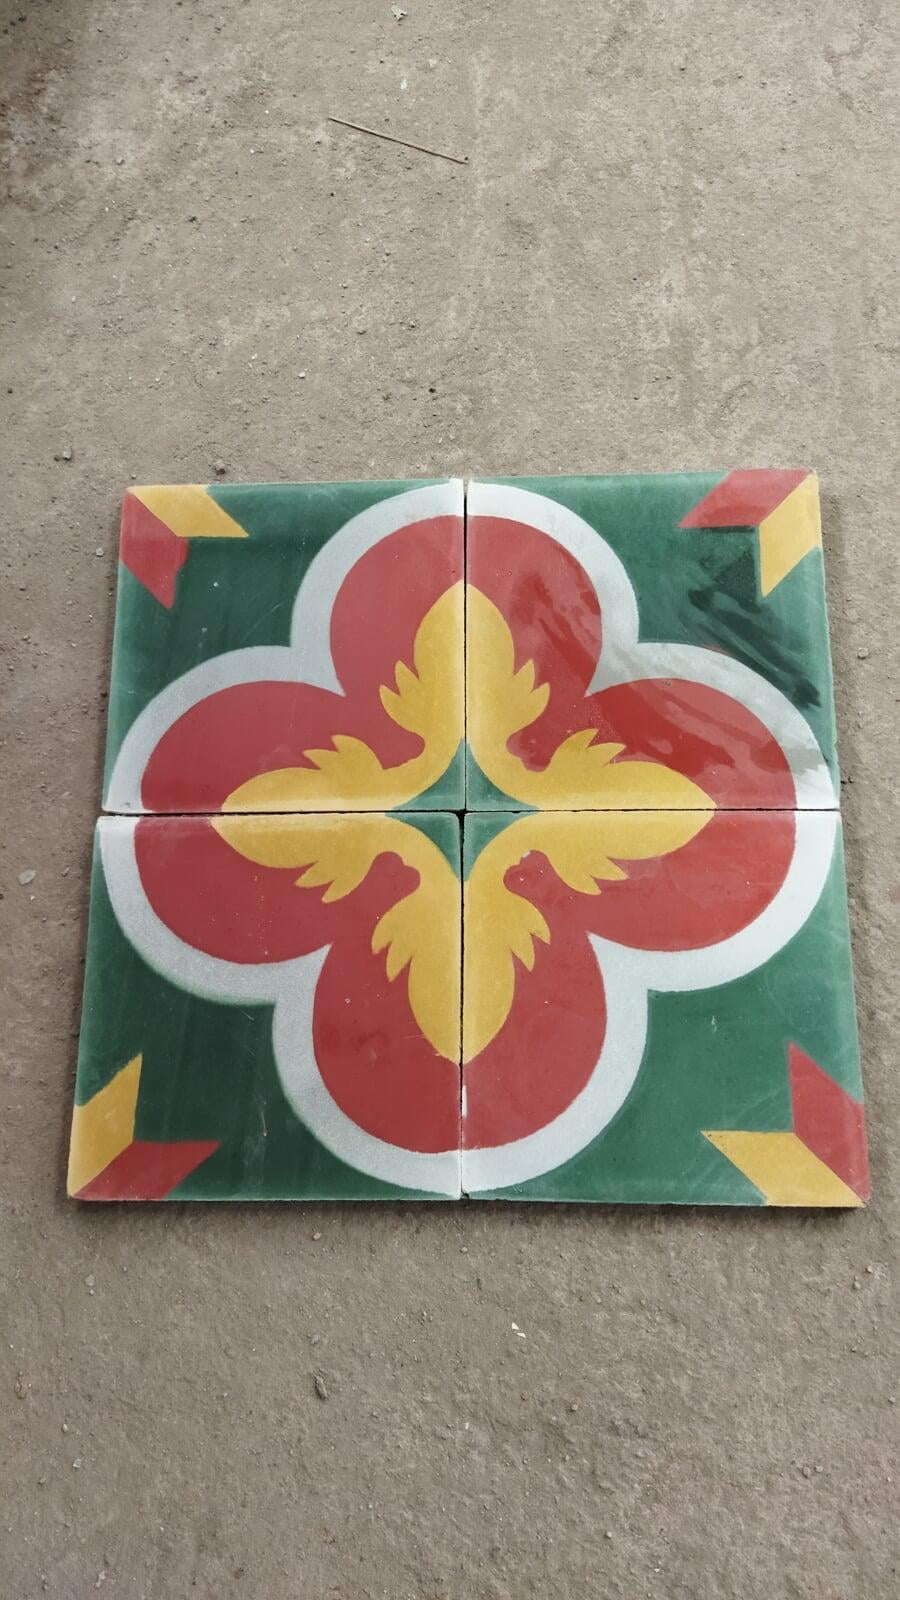 Four Athangudi tiles have been placed on the floor in a 2x2 formation such that they make a big square in which each quarter is one tile. The tiles have a green background, and a flowery motif of red, yellow and white at the center. The corners of the square have a small motif, which looks like a yellow diamond and a red diamond placed next to each other. 